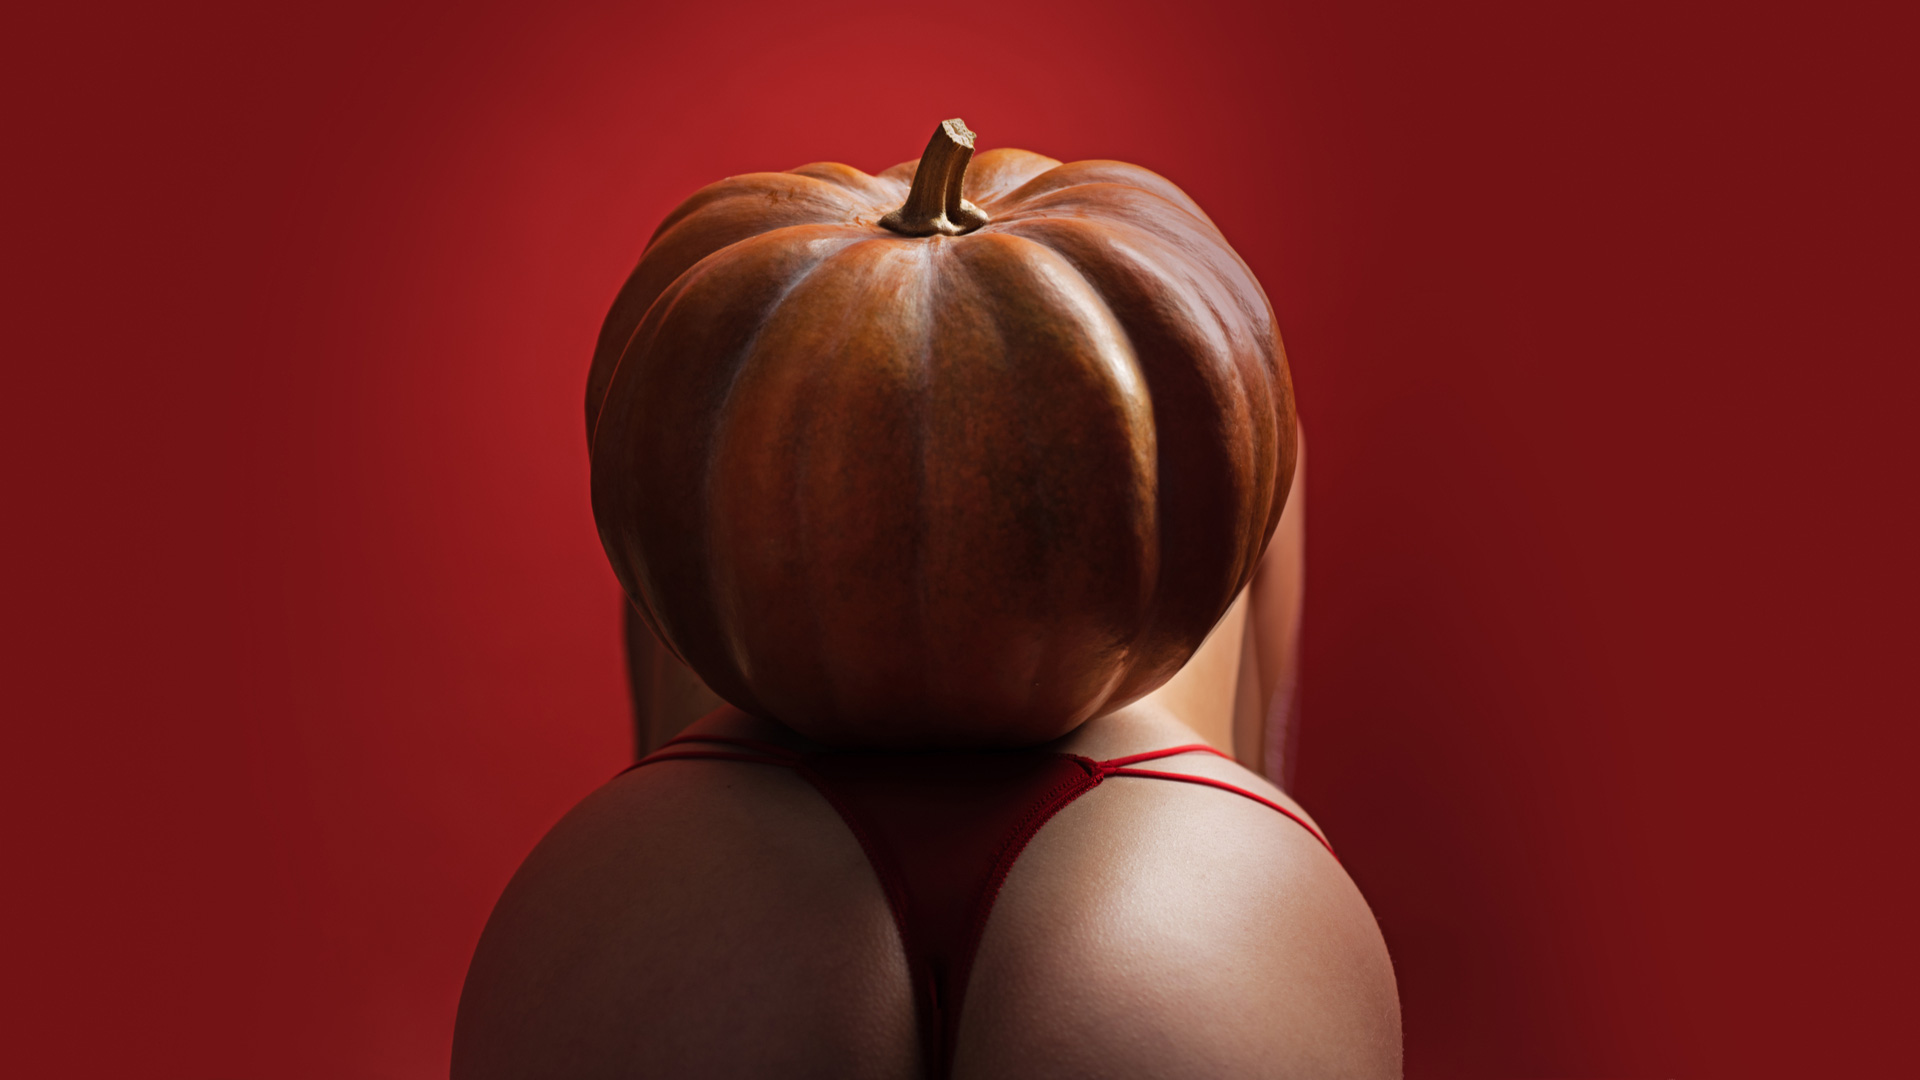 Ass of a woman wearing revealing, red thong bending over with orange pumpkin on her back.